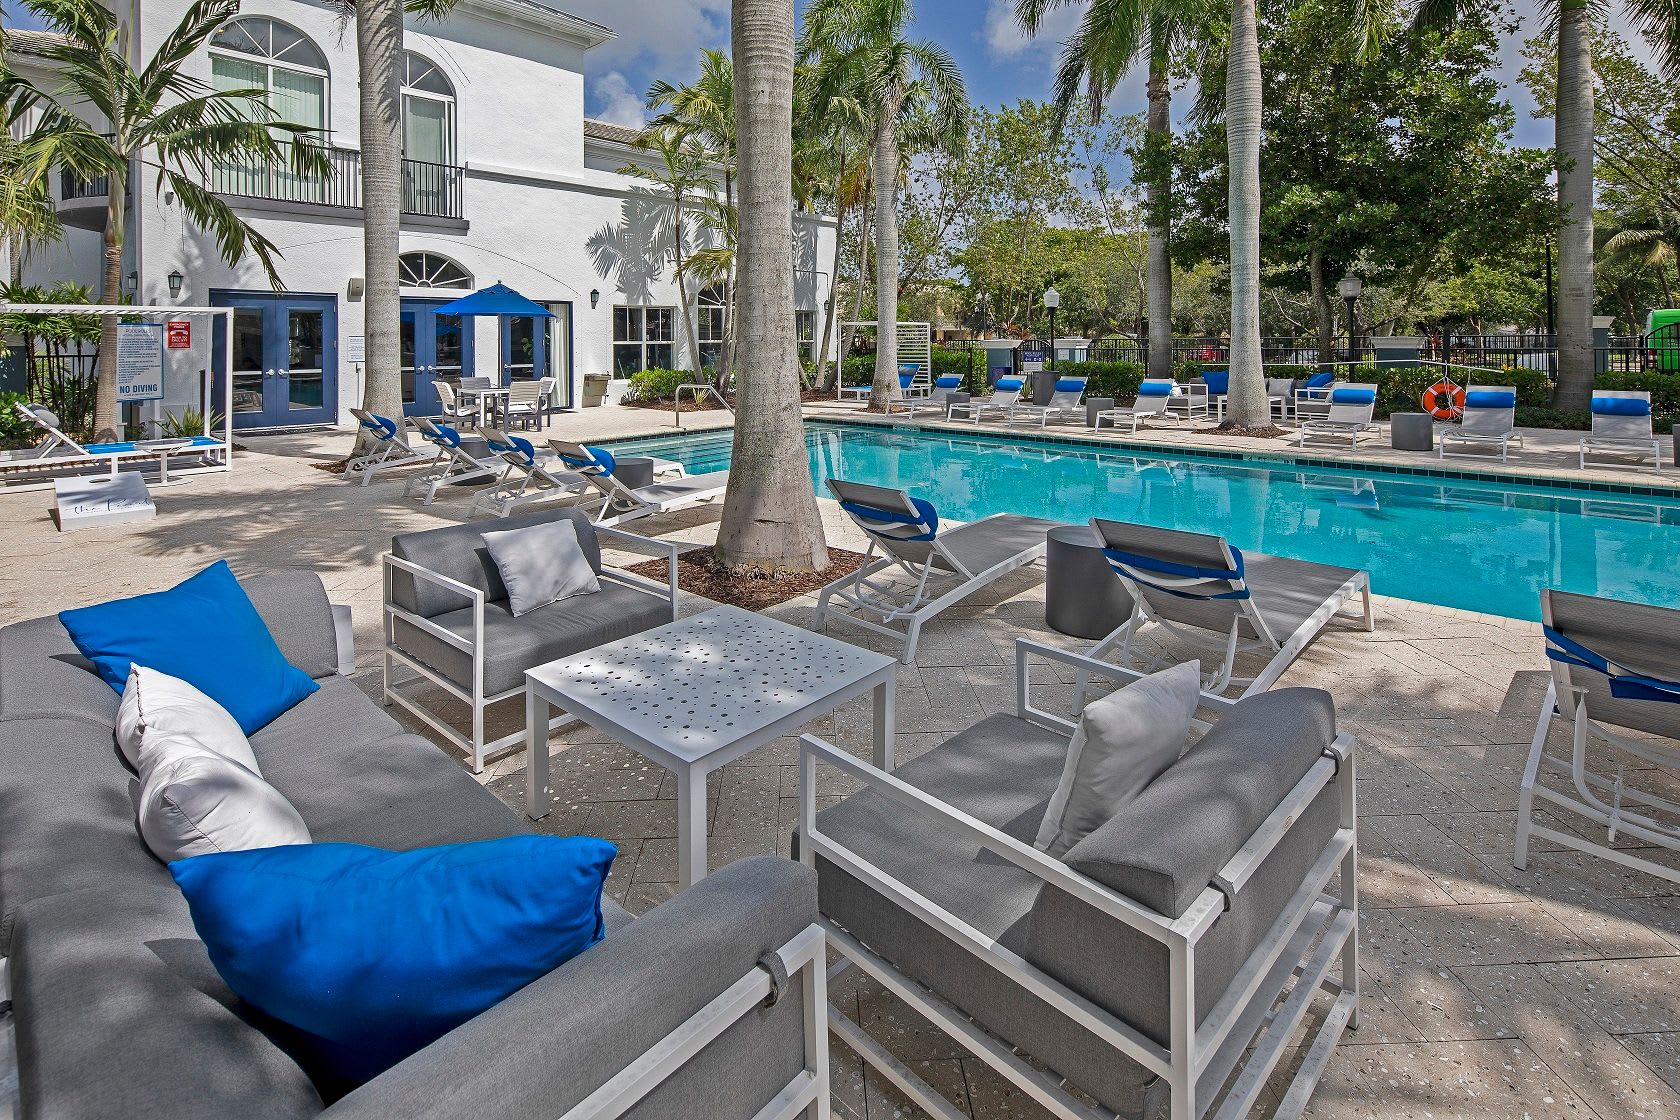 Large pool at The Pearl in Ft Lauderdale, Florida